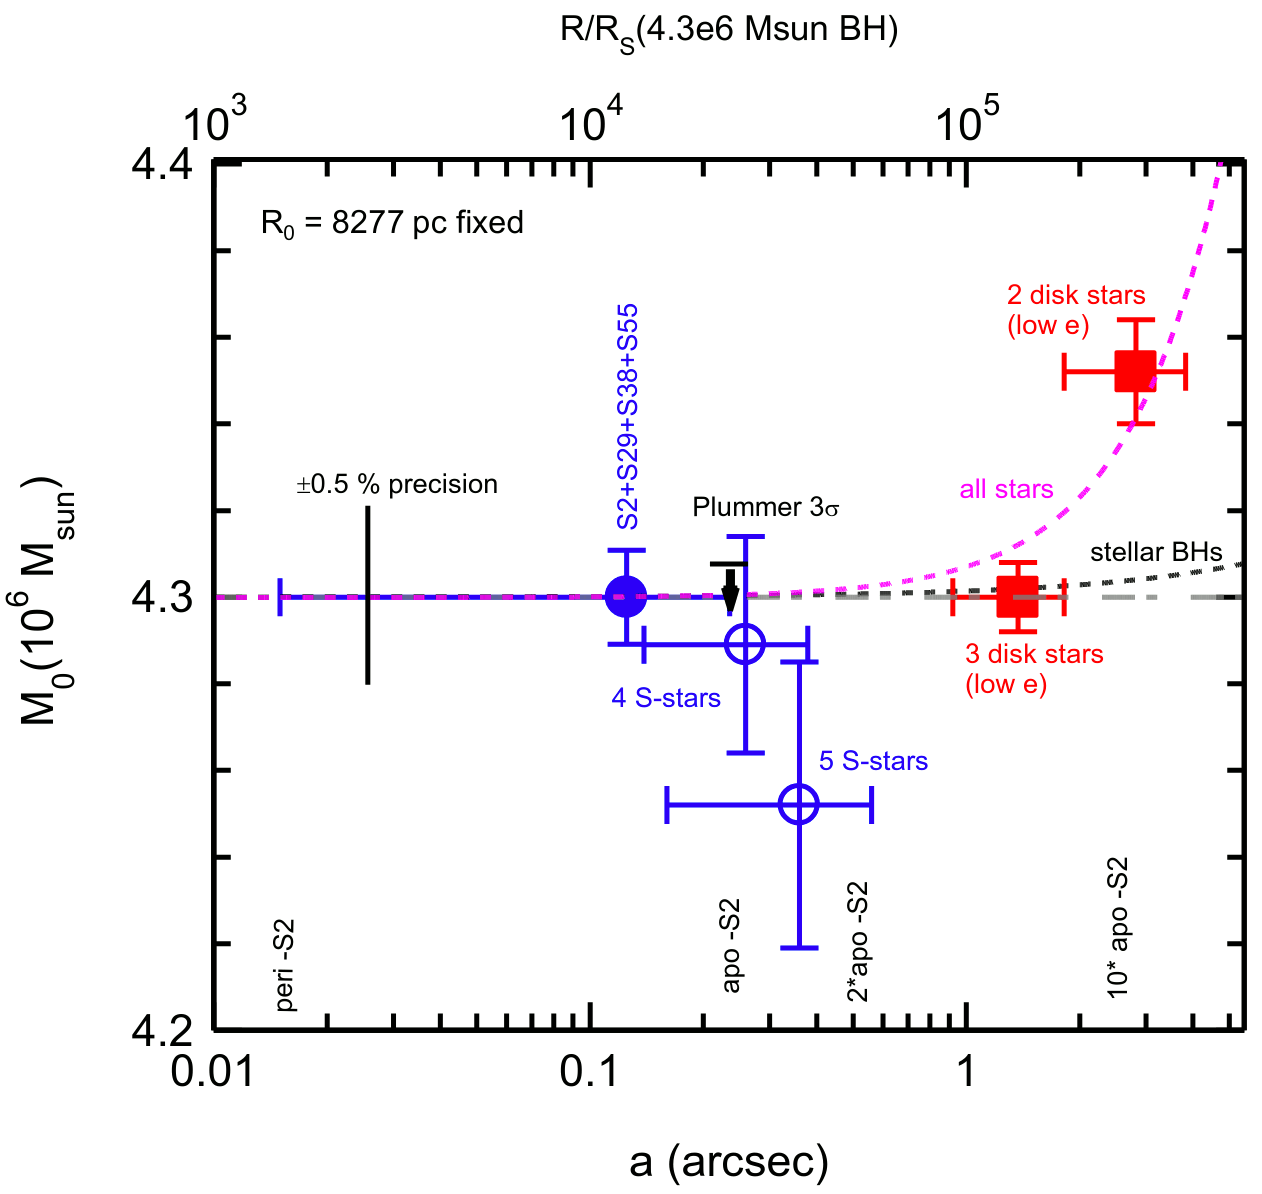 Interior mass as a function of distance from Sgr A* (2021)